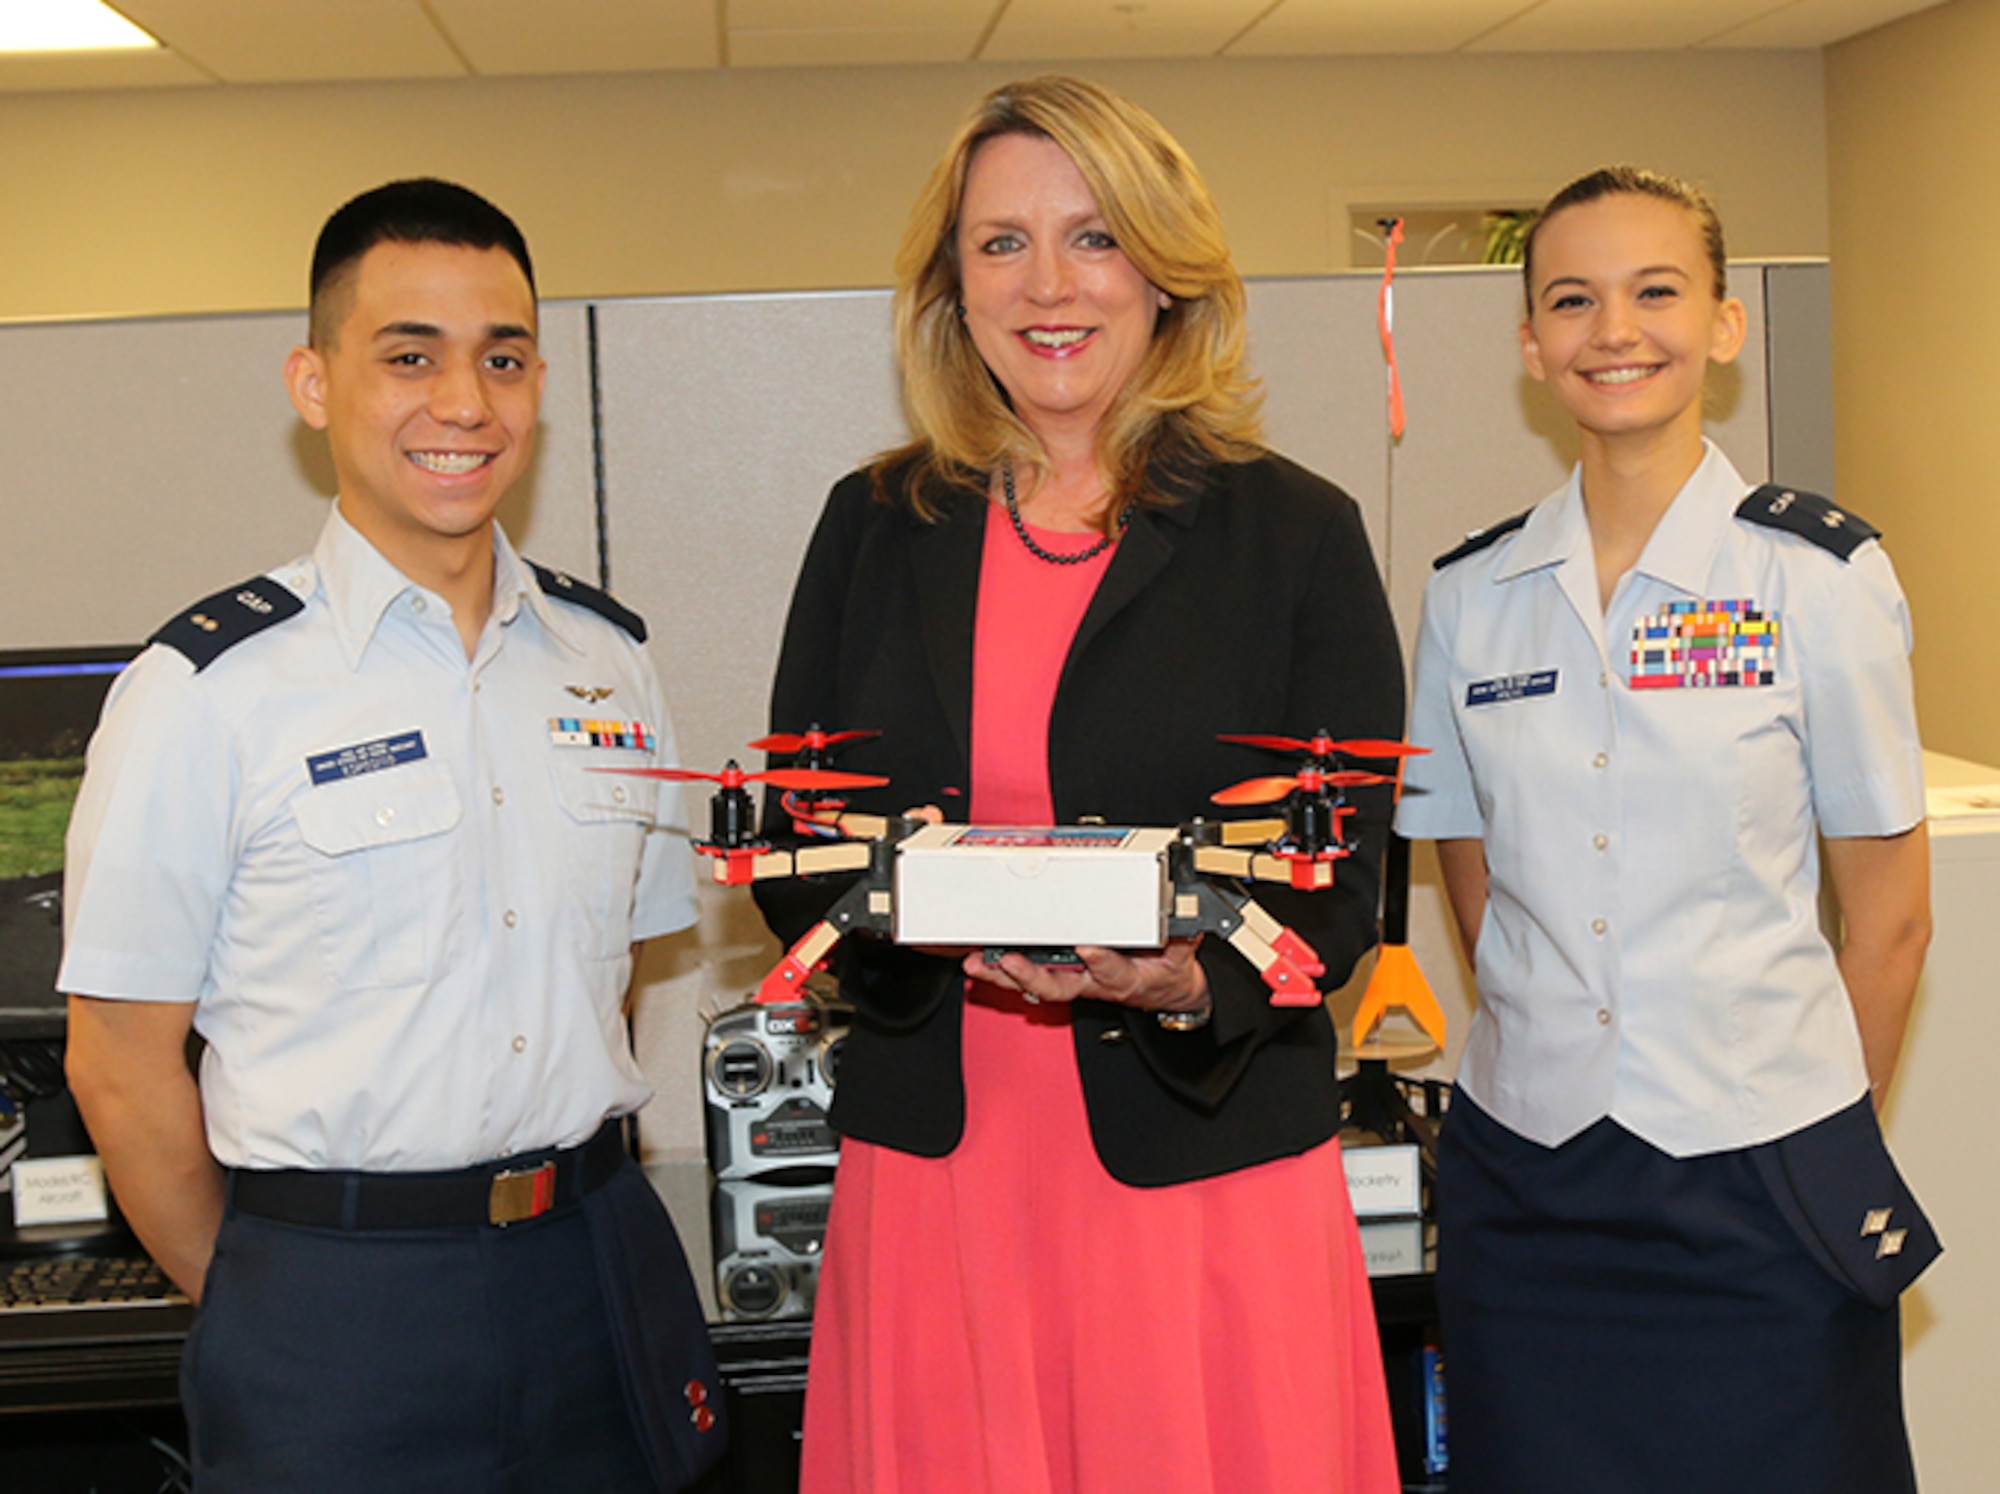 Civil Air Patrol Cadet 1st Lt. Antonio Esposito (left) of the Tuscaloosa Composite Squadron and CAP Cadet Lt. Col. Ava Michl (right) of the Bessemer Composite Squadron show Secretary of the Air Force Deborah Lee James a “quadcopter” during her visit to National Headquarters Wednesday. The quadcopter is one of seven available CAP STEM (Science, Technology, Engineering and Math) Kits used to promote STEM careers nationwide.